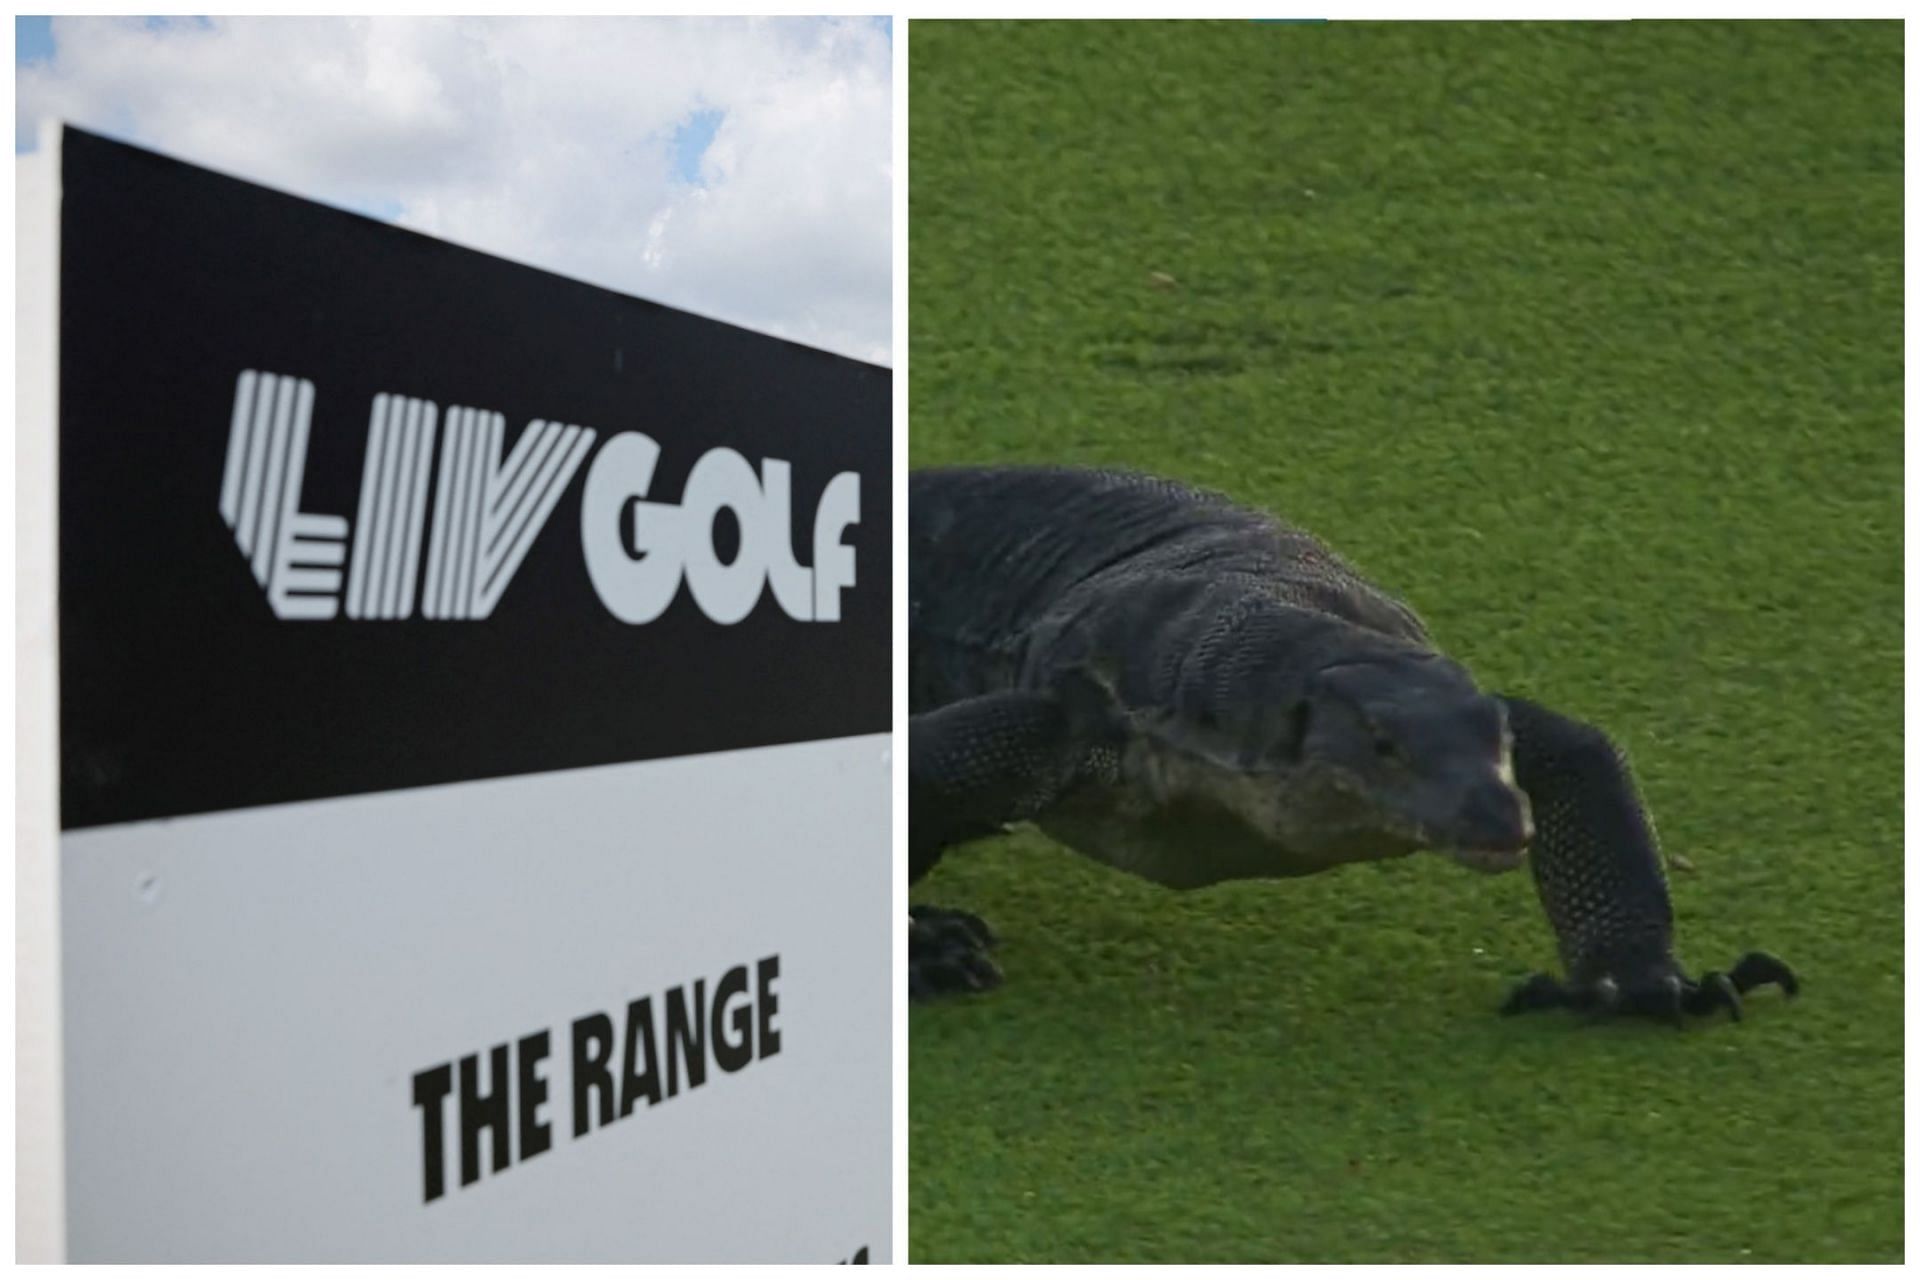 LIV Golf Singapore saw intrusion of a monitor lizard during the first round